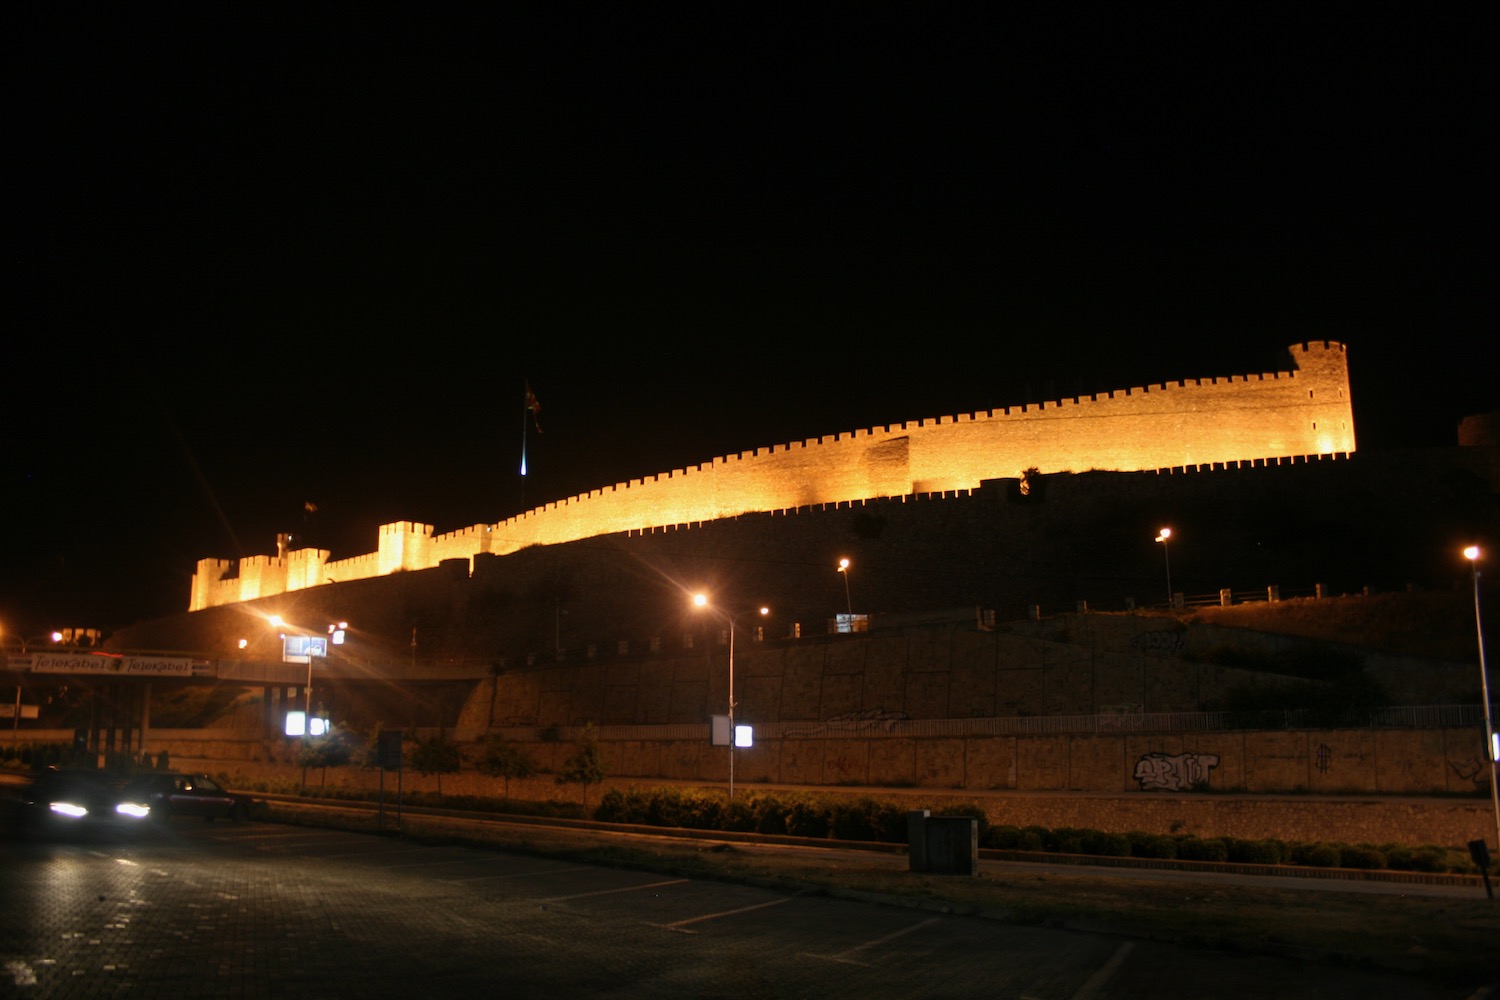 a large stone wall with lights at night